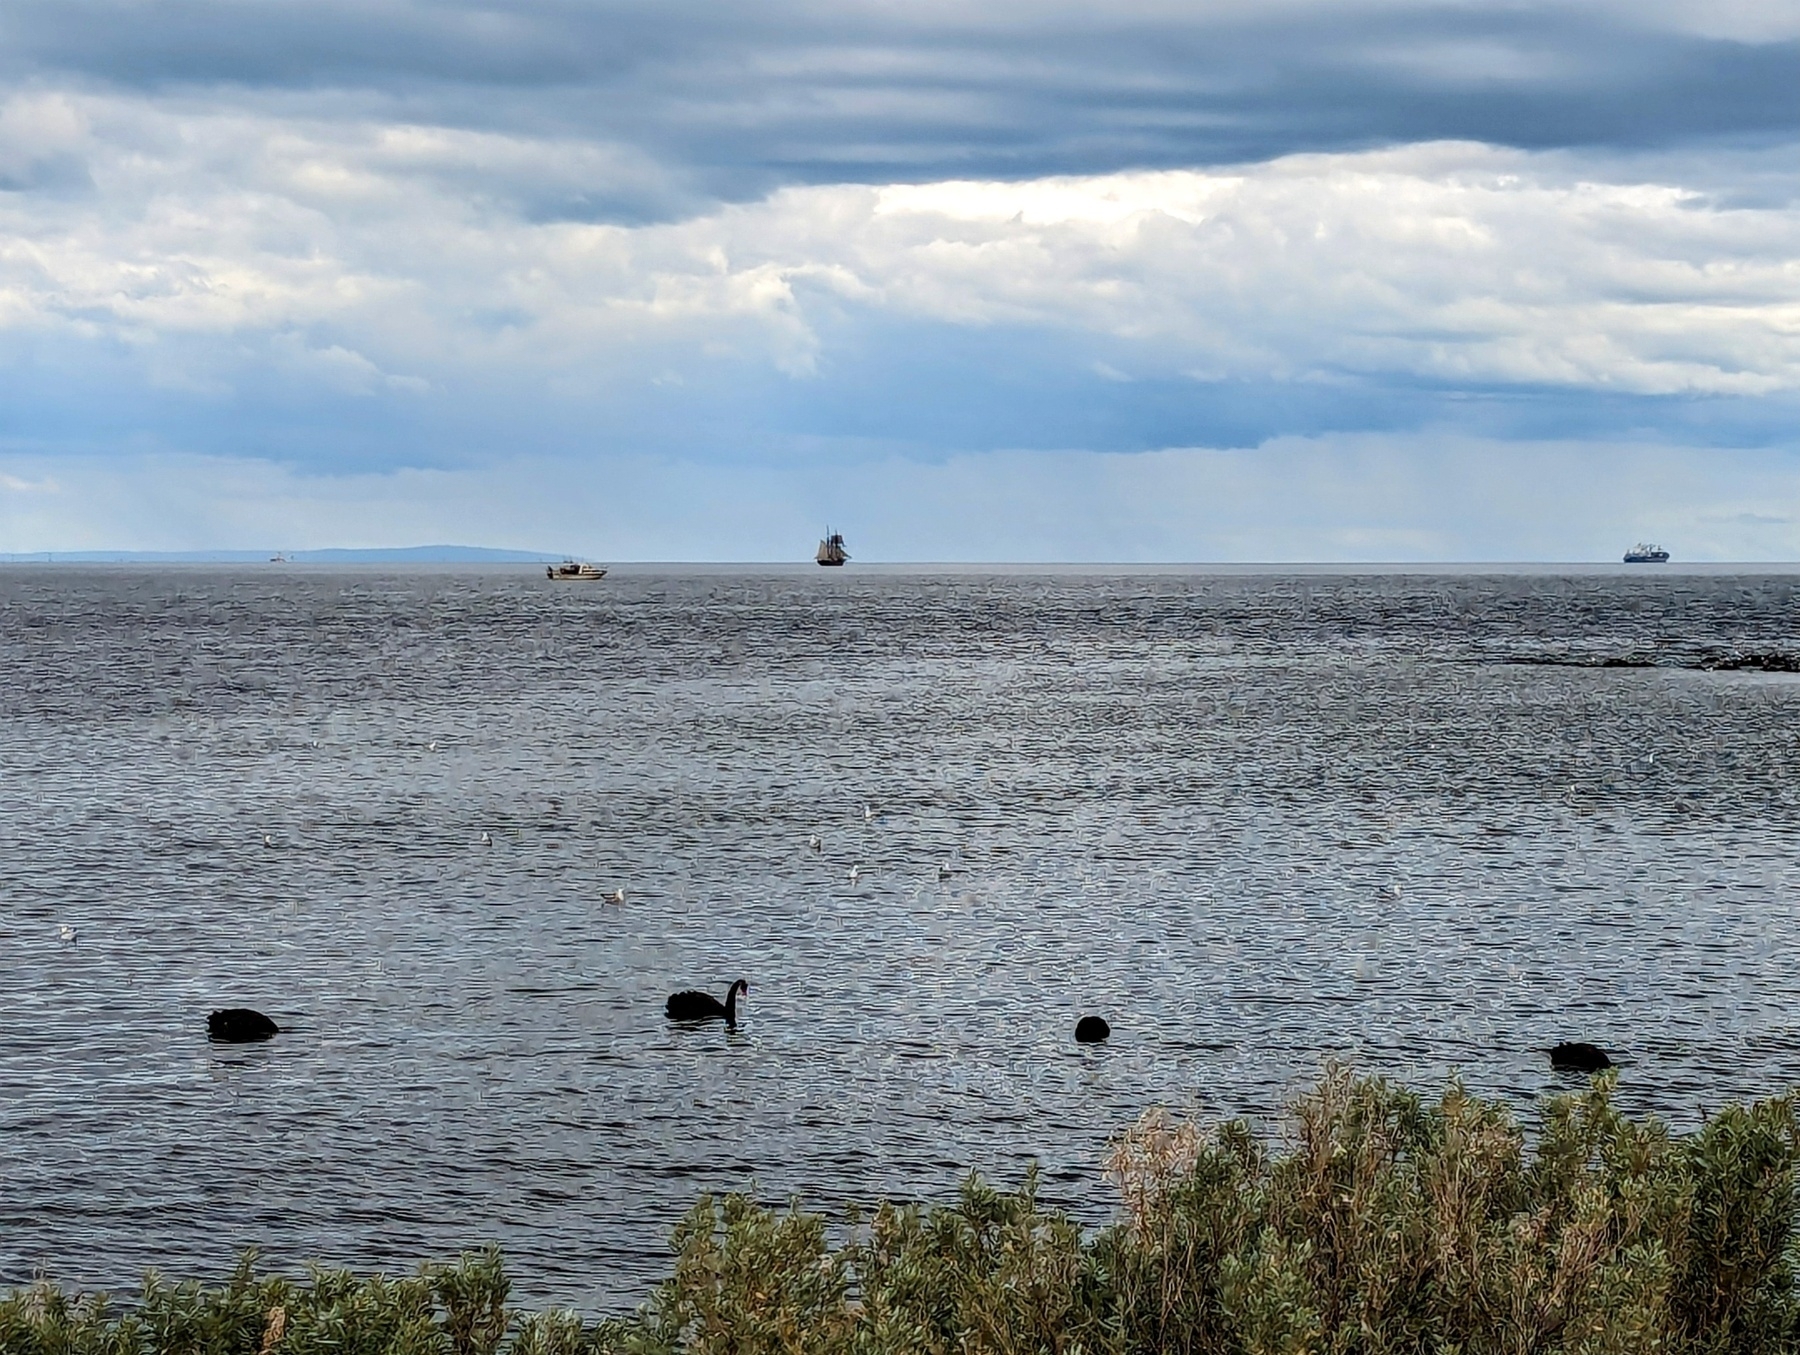 A view of a bay with a sailing ship in the distance and several black swans feeding in the foreground 